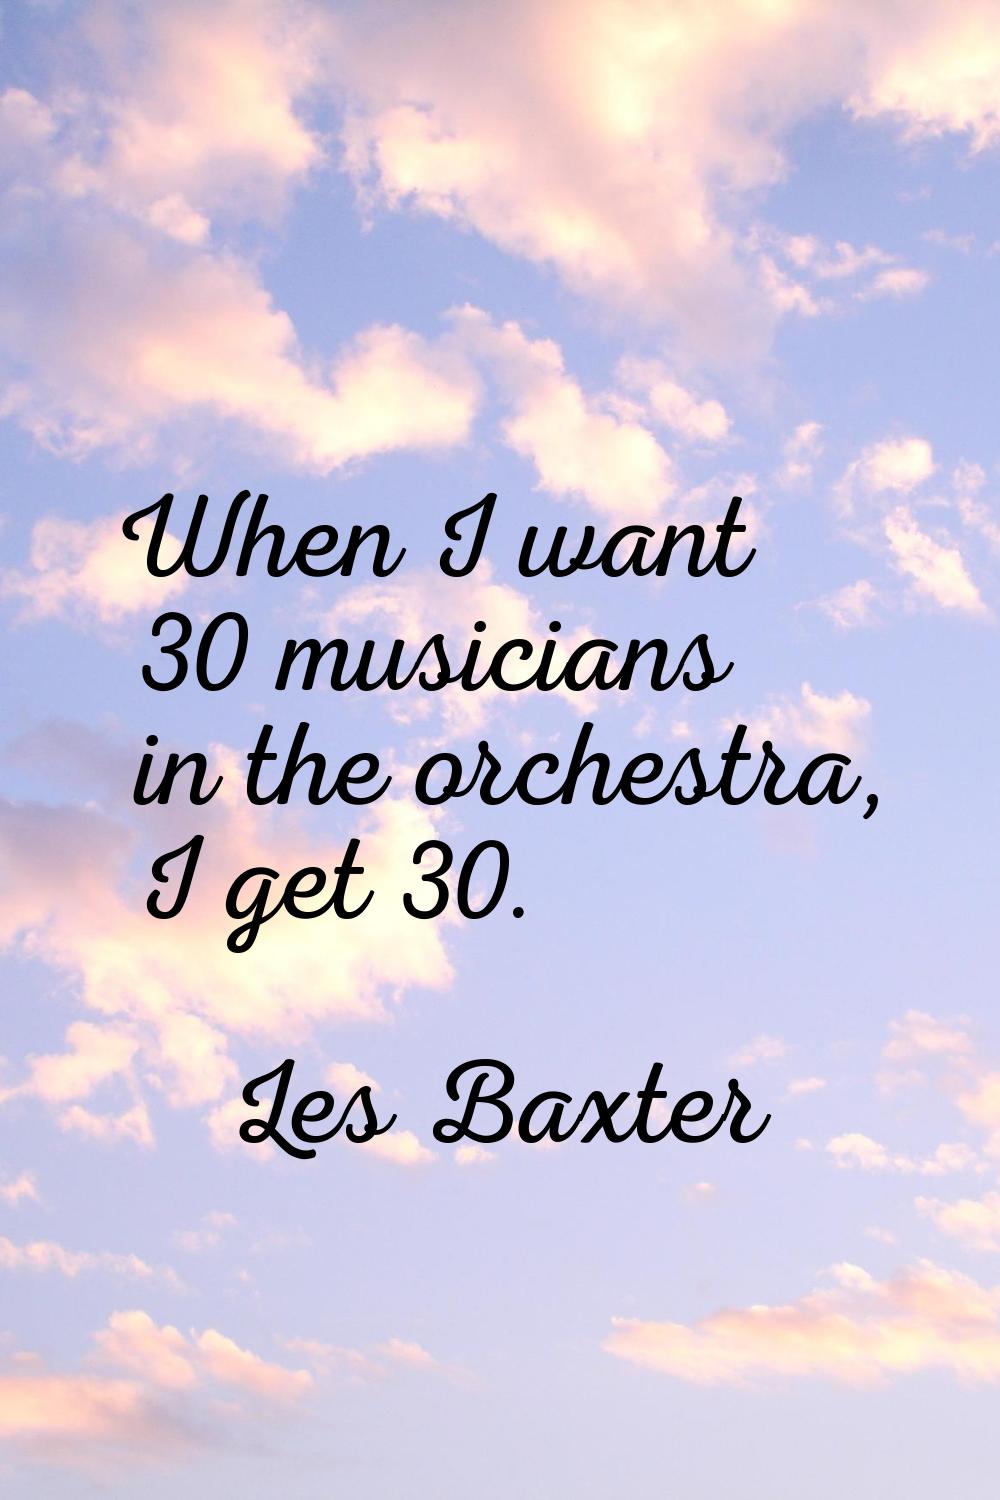 When I want 30 musicians in the orchestra, I get 30.